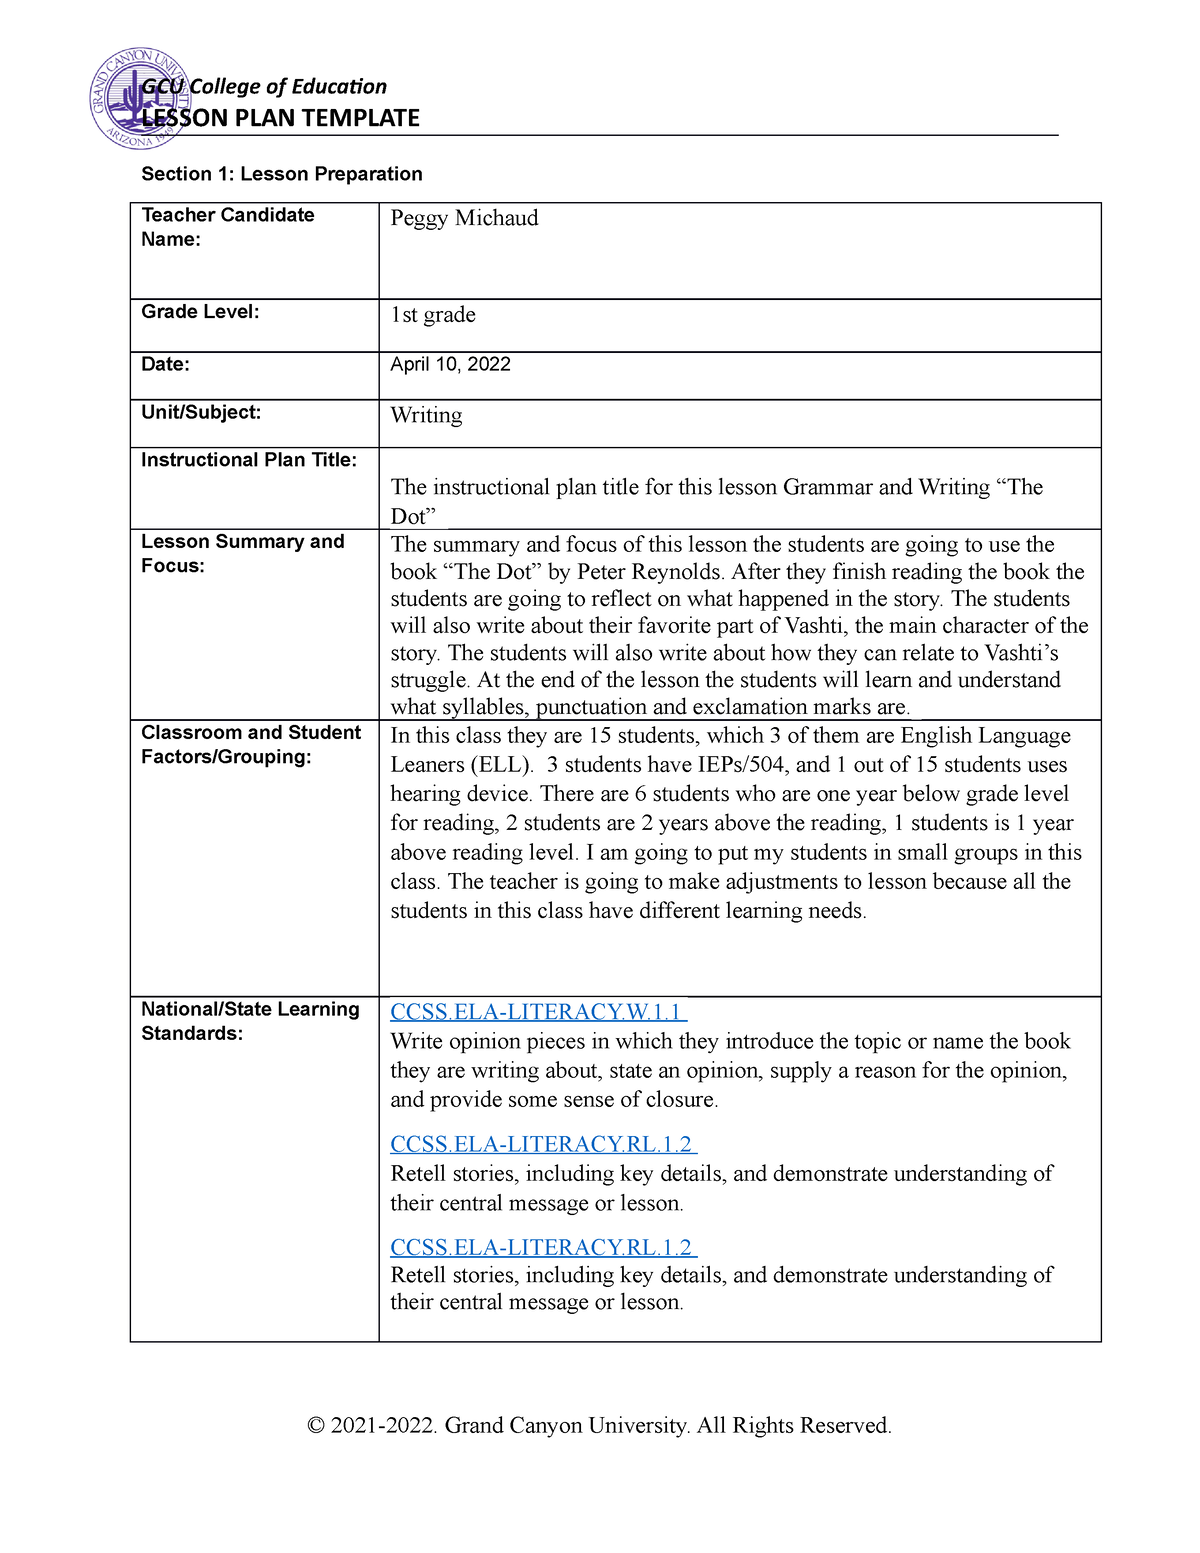 elm-480-coe-lesson-plan-grammar-and-writting-instruction-lesson-plan-template-section-1